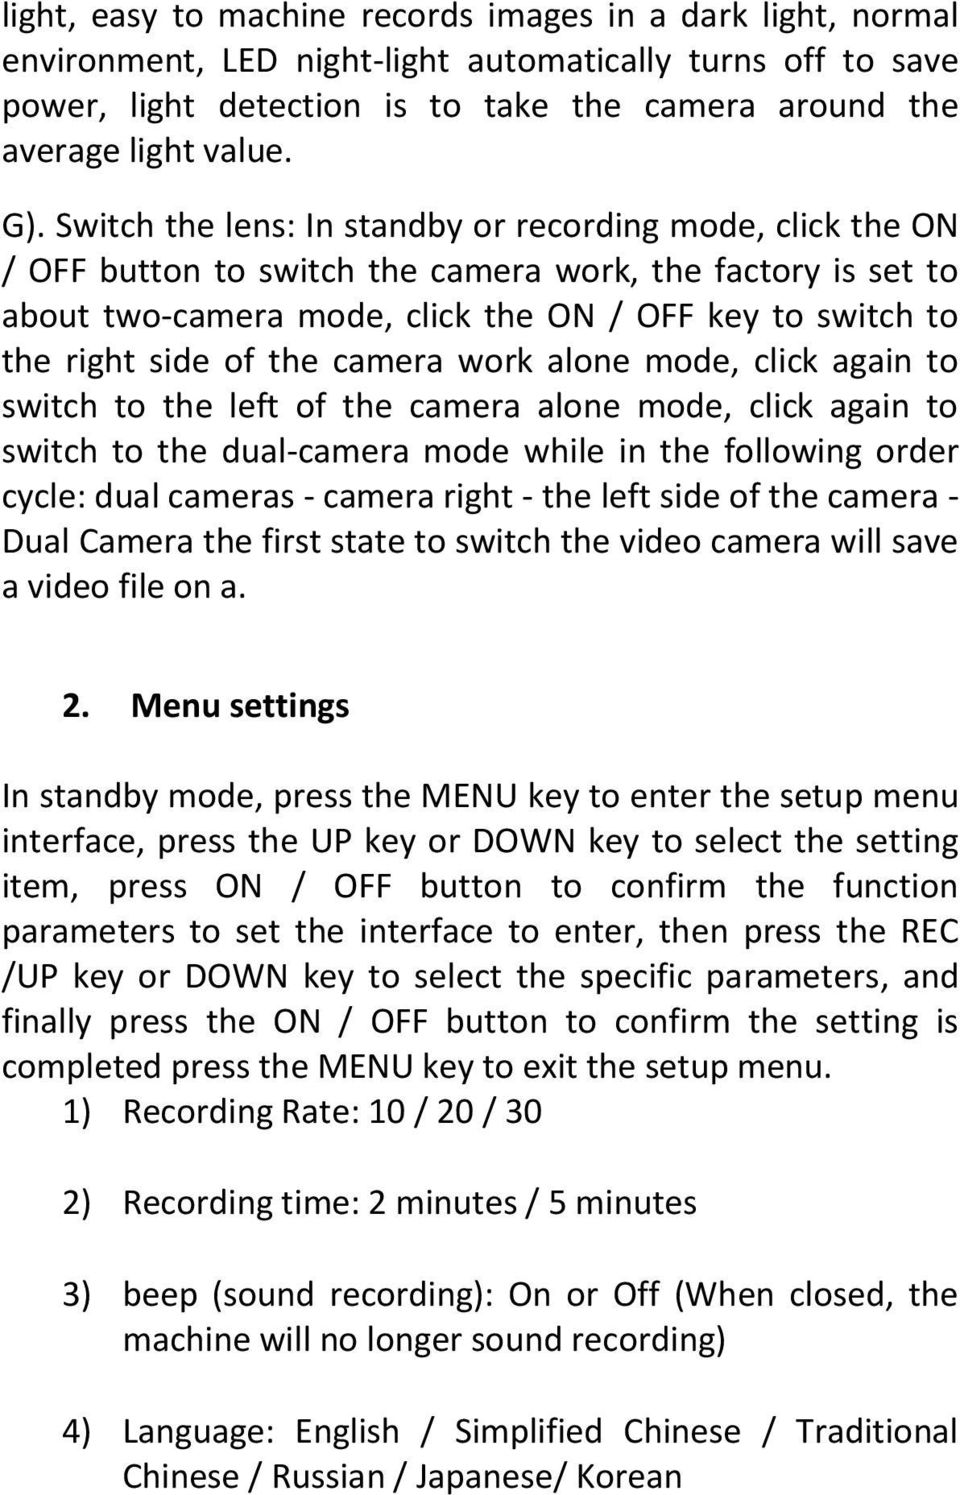 of the camera work alone mode, click again to switch to the left of the camera alone mode, click again to switch to the dual-camera mode while in the following order cycle: dual cameras - camera